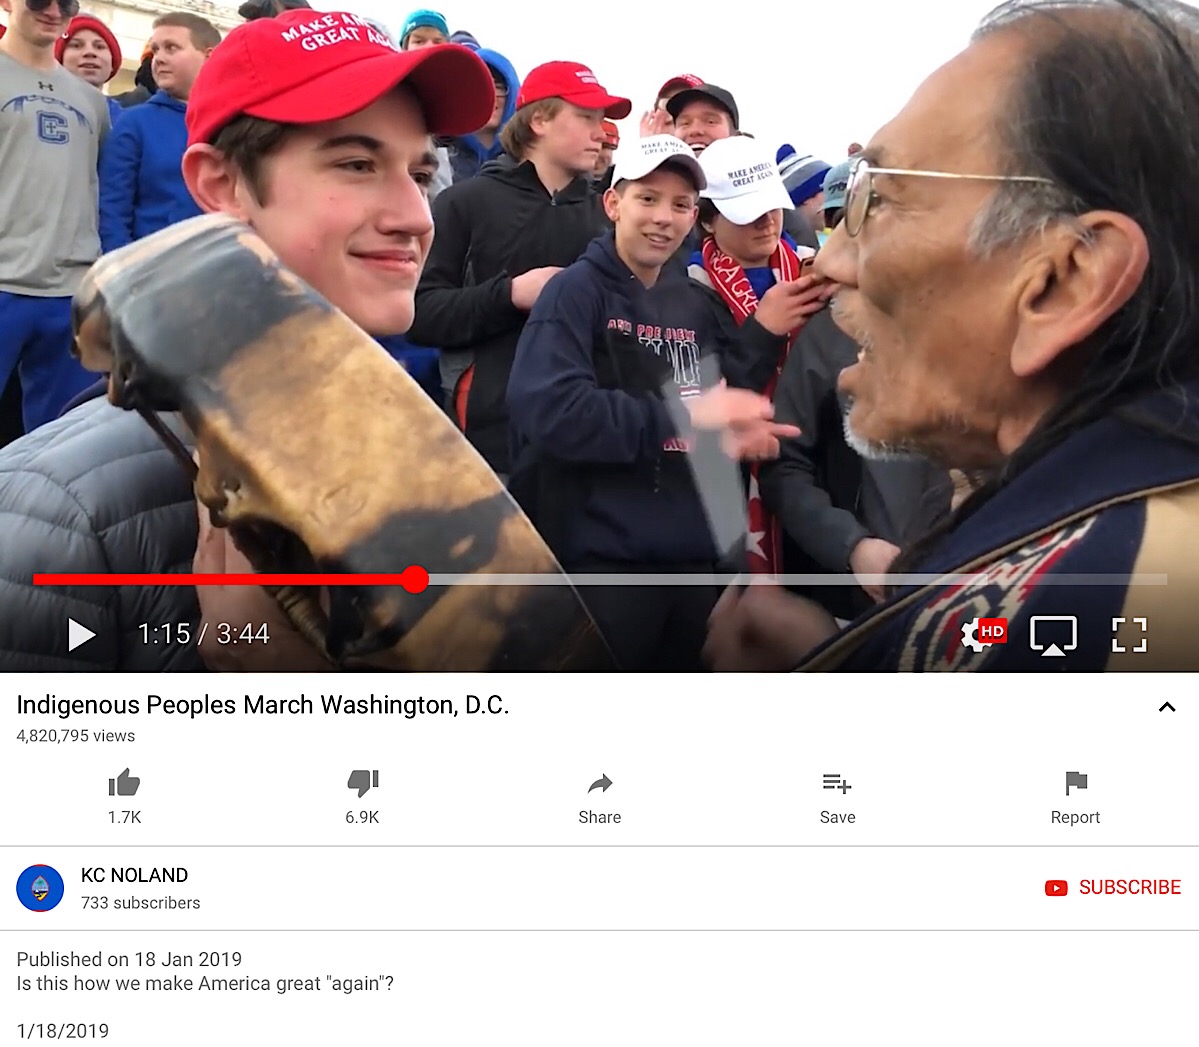 A screenshot of the original YouTube video showing the encounter between Covington Catholic High School students and a native American man.